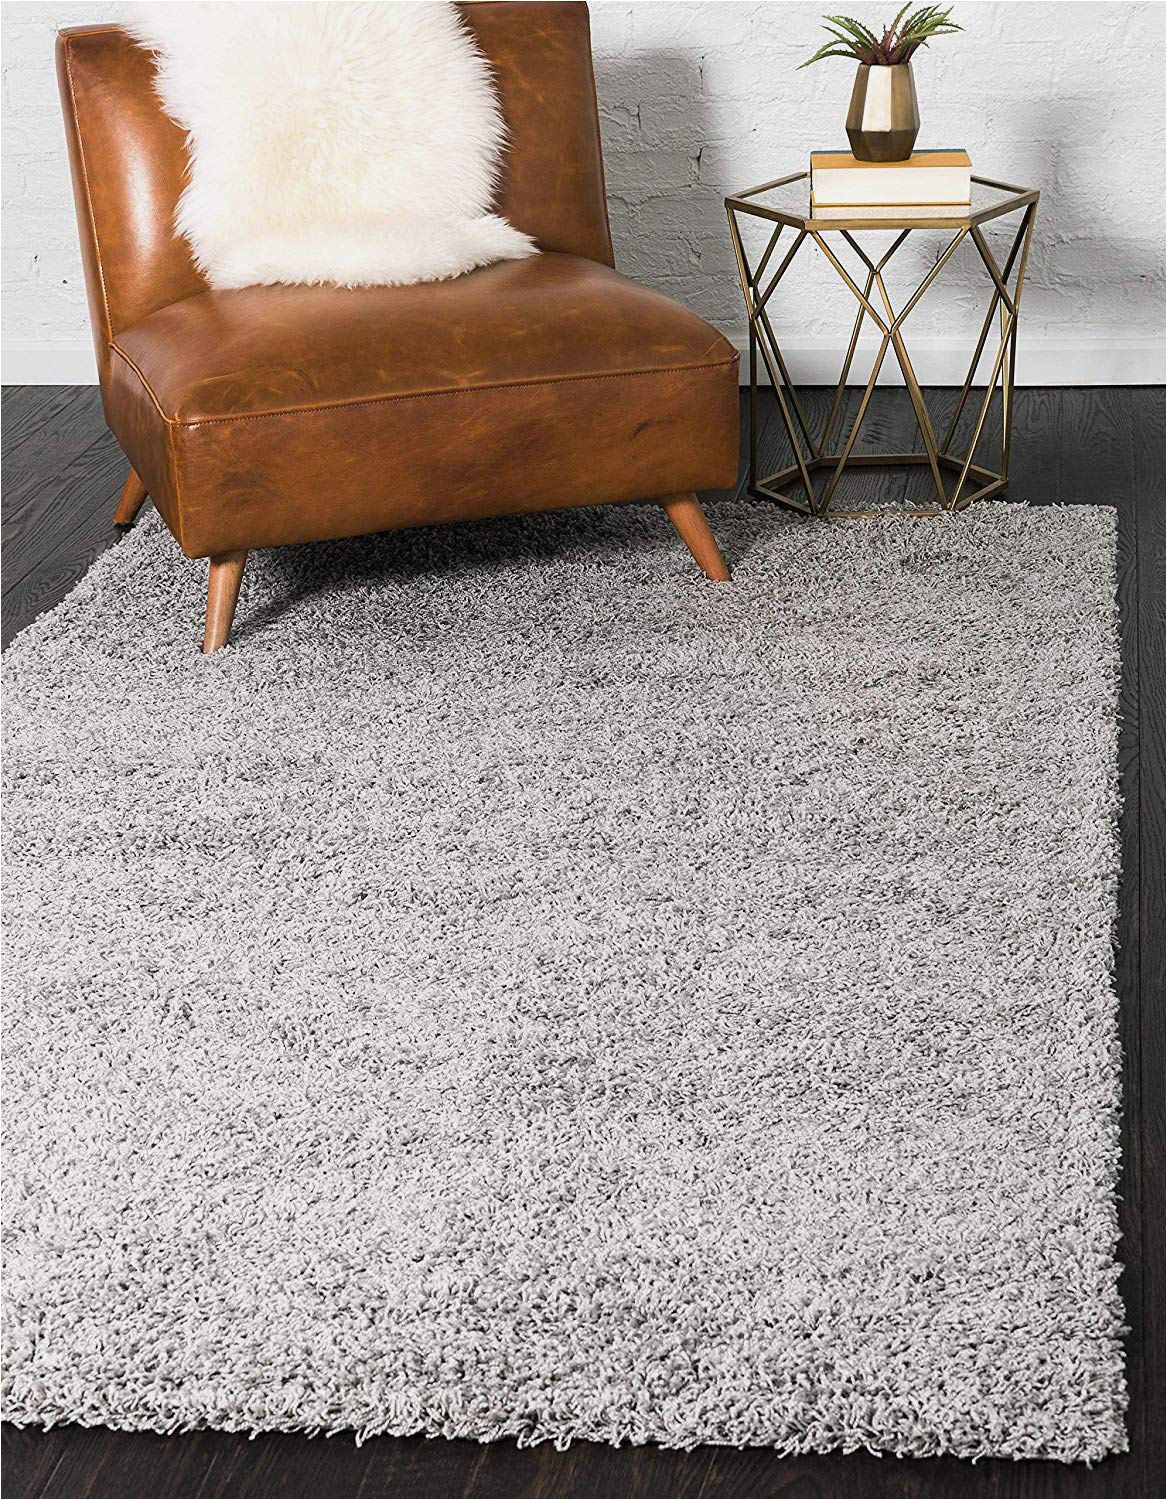 10 X 12 area Rugs Near Me 11 Best area Rugs Under $200 2018 the Strategist